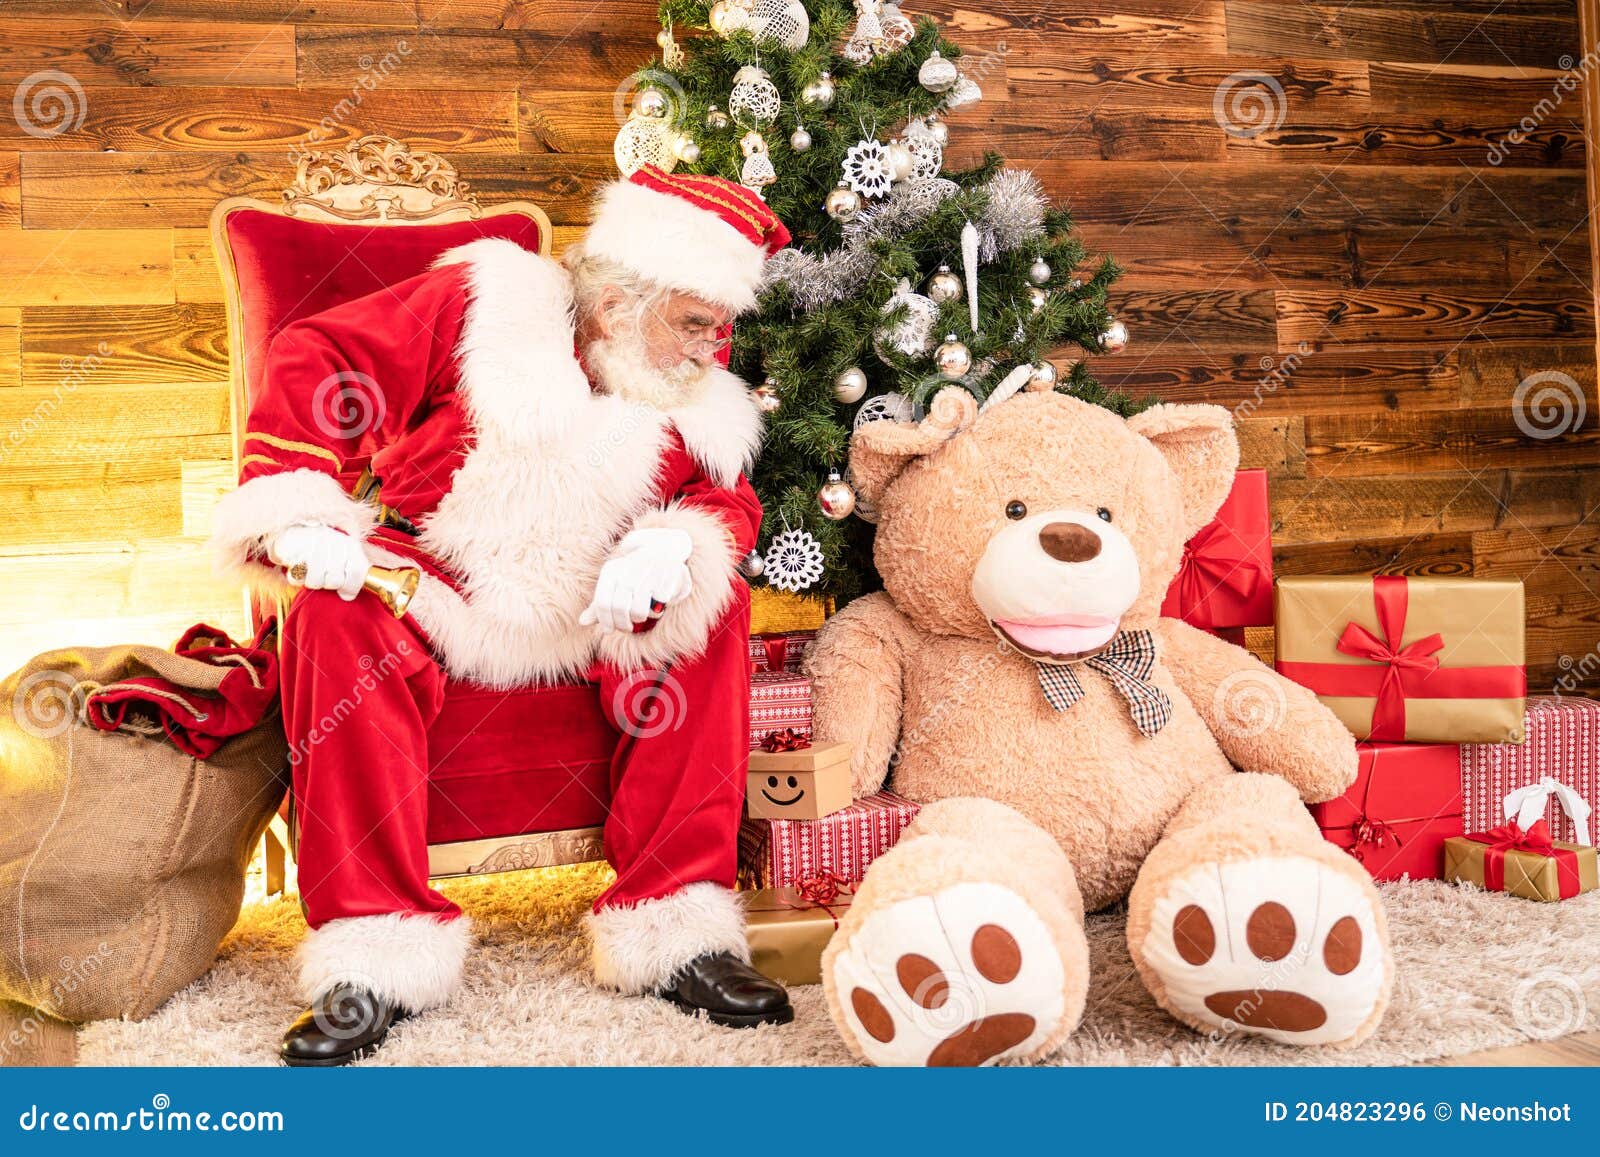 Real Santa Claus with Big Teddy Bear Sitting Under the Christmas ...